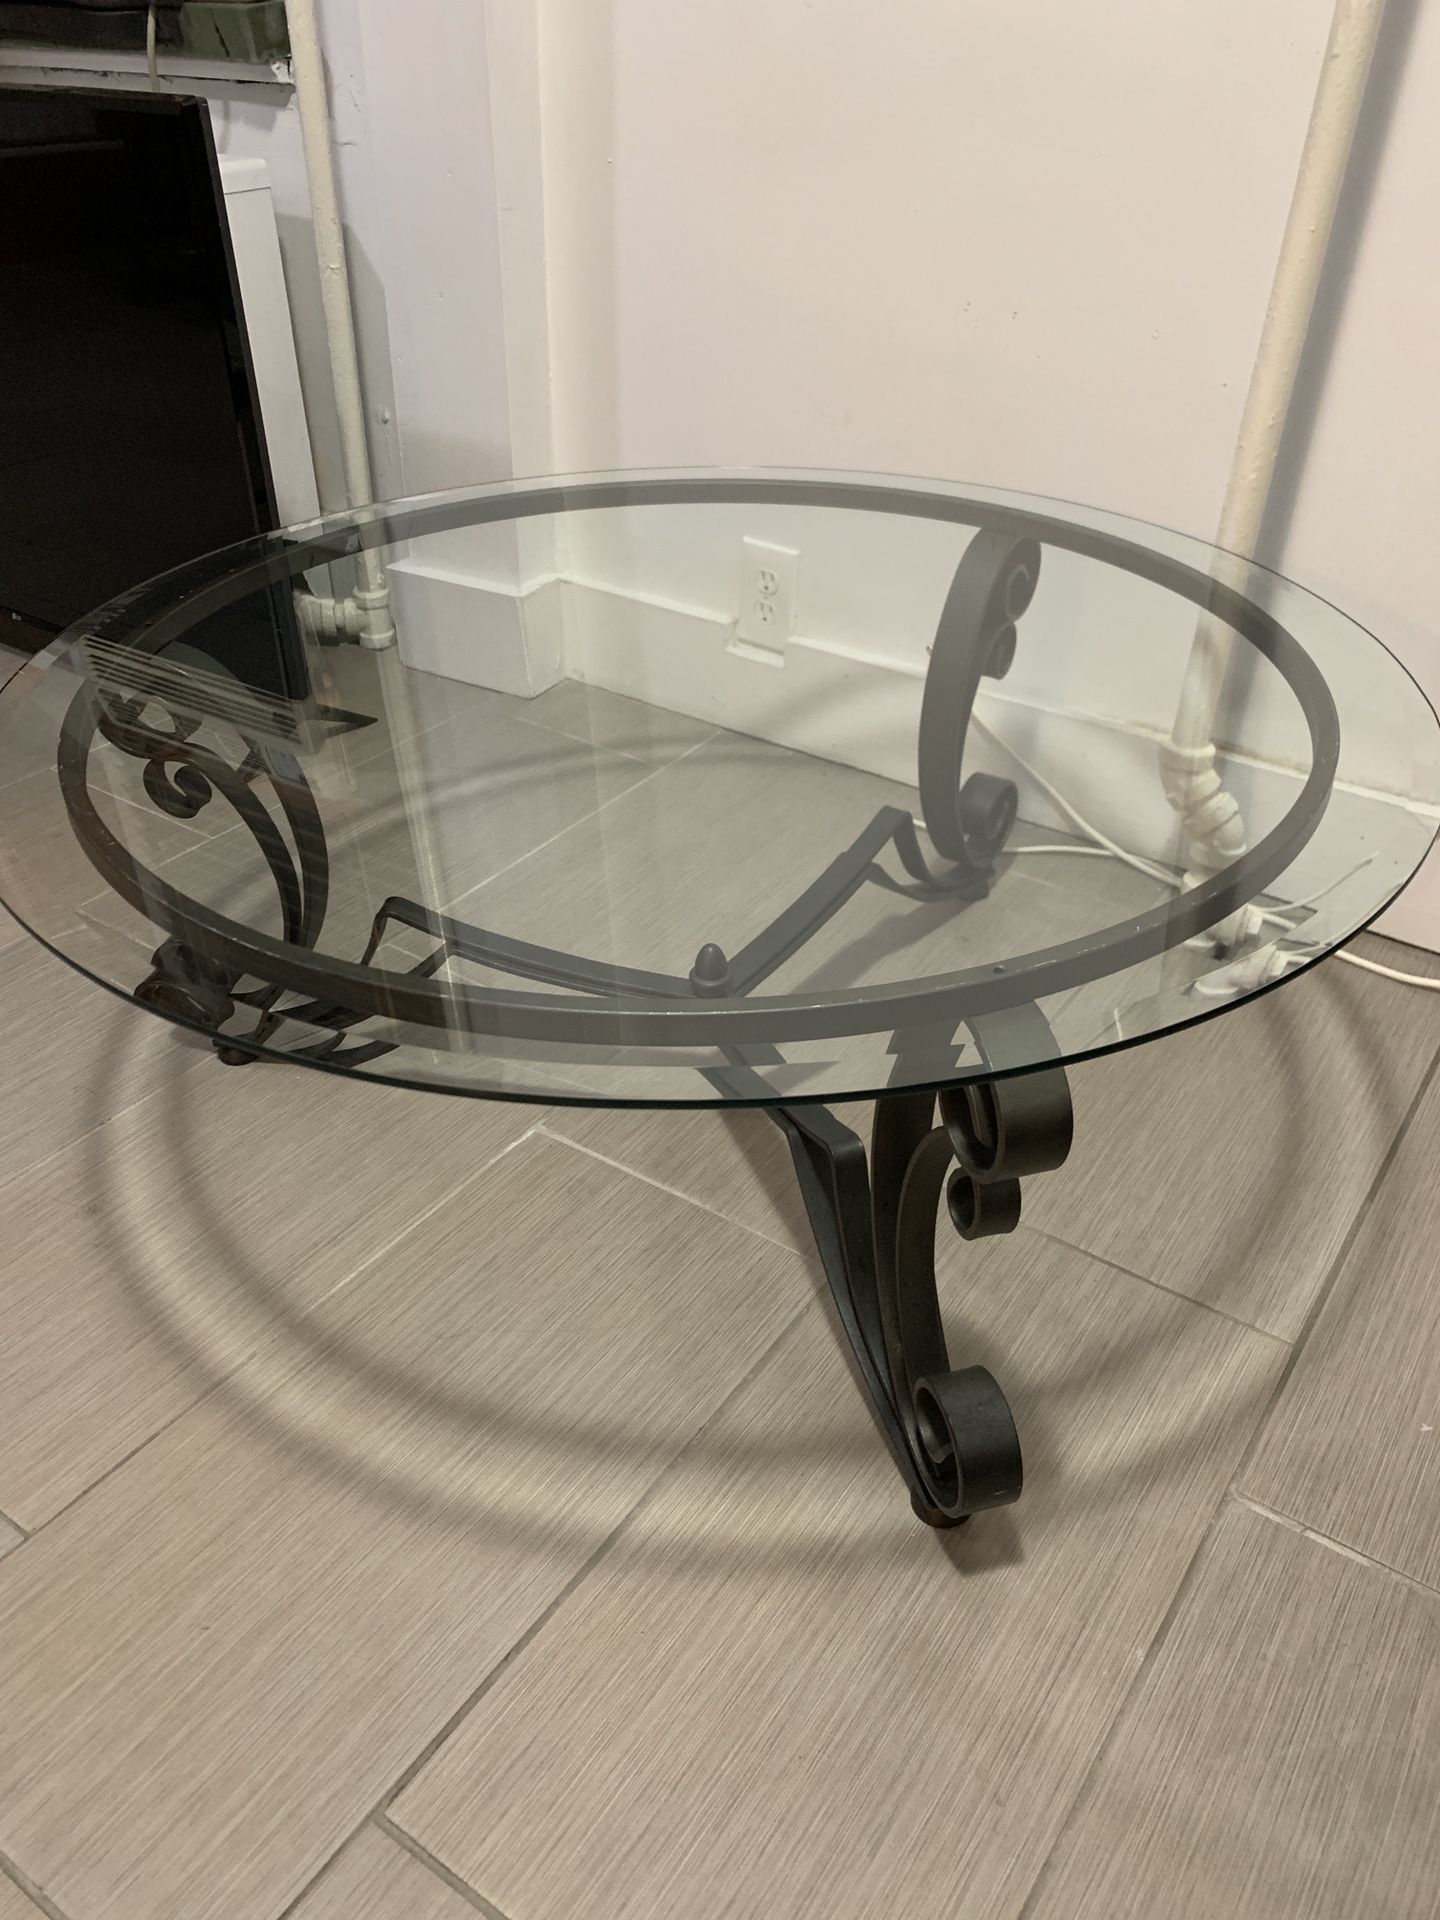 Gorgeous glass coffee table perfect for any space and in amazing condition with stand !